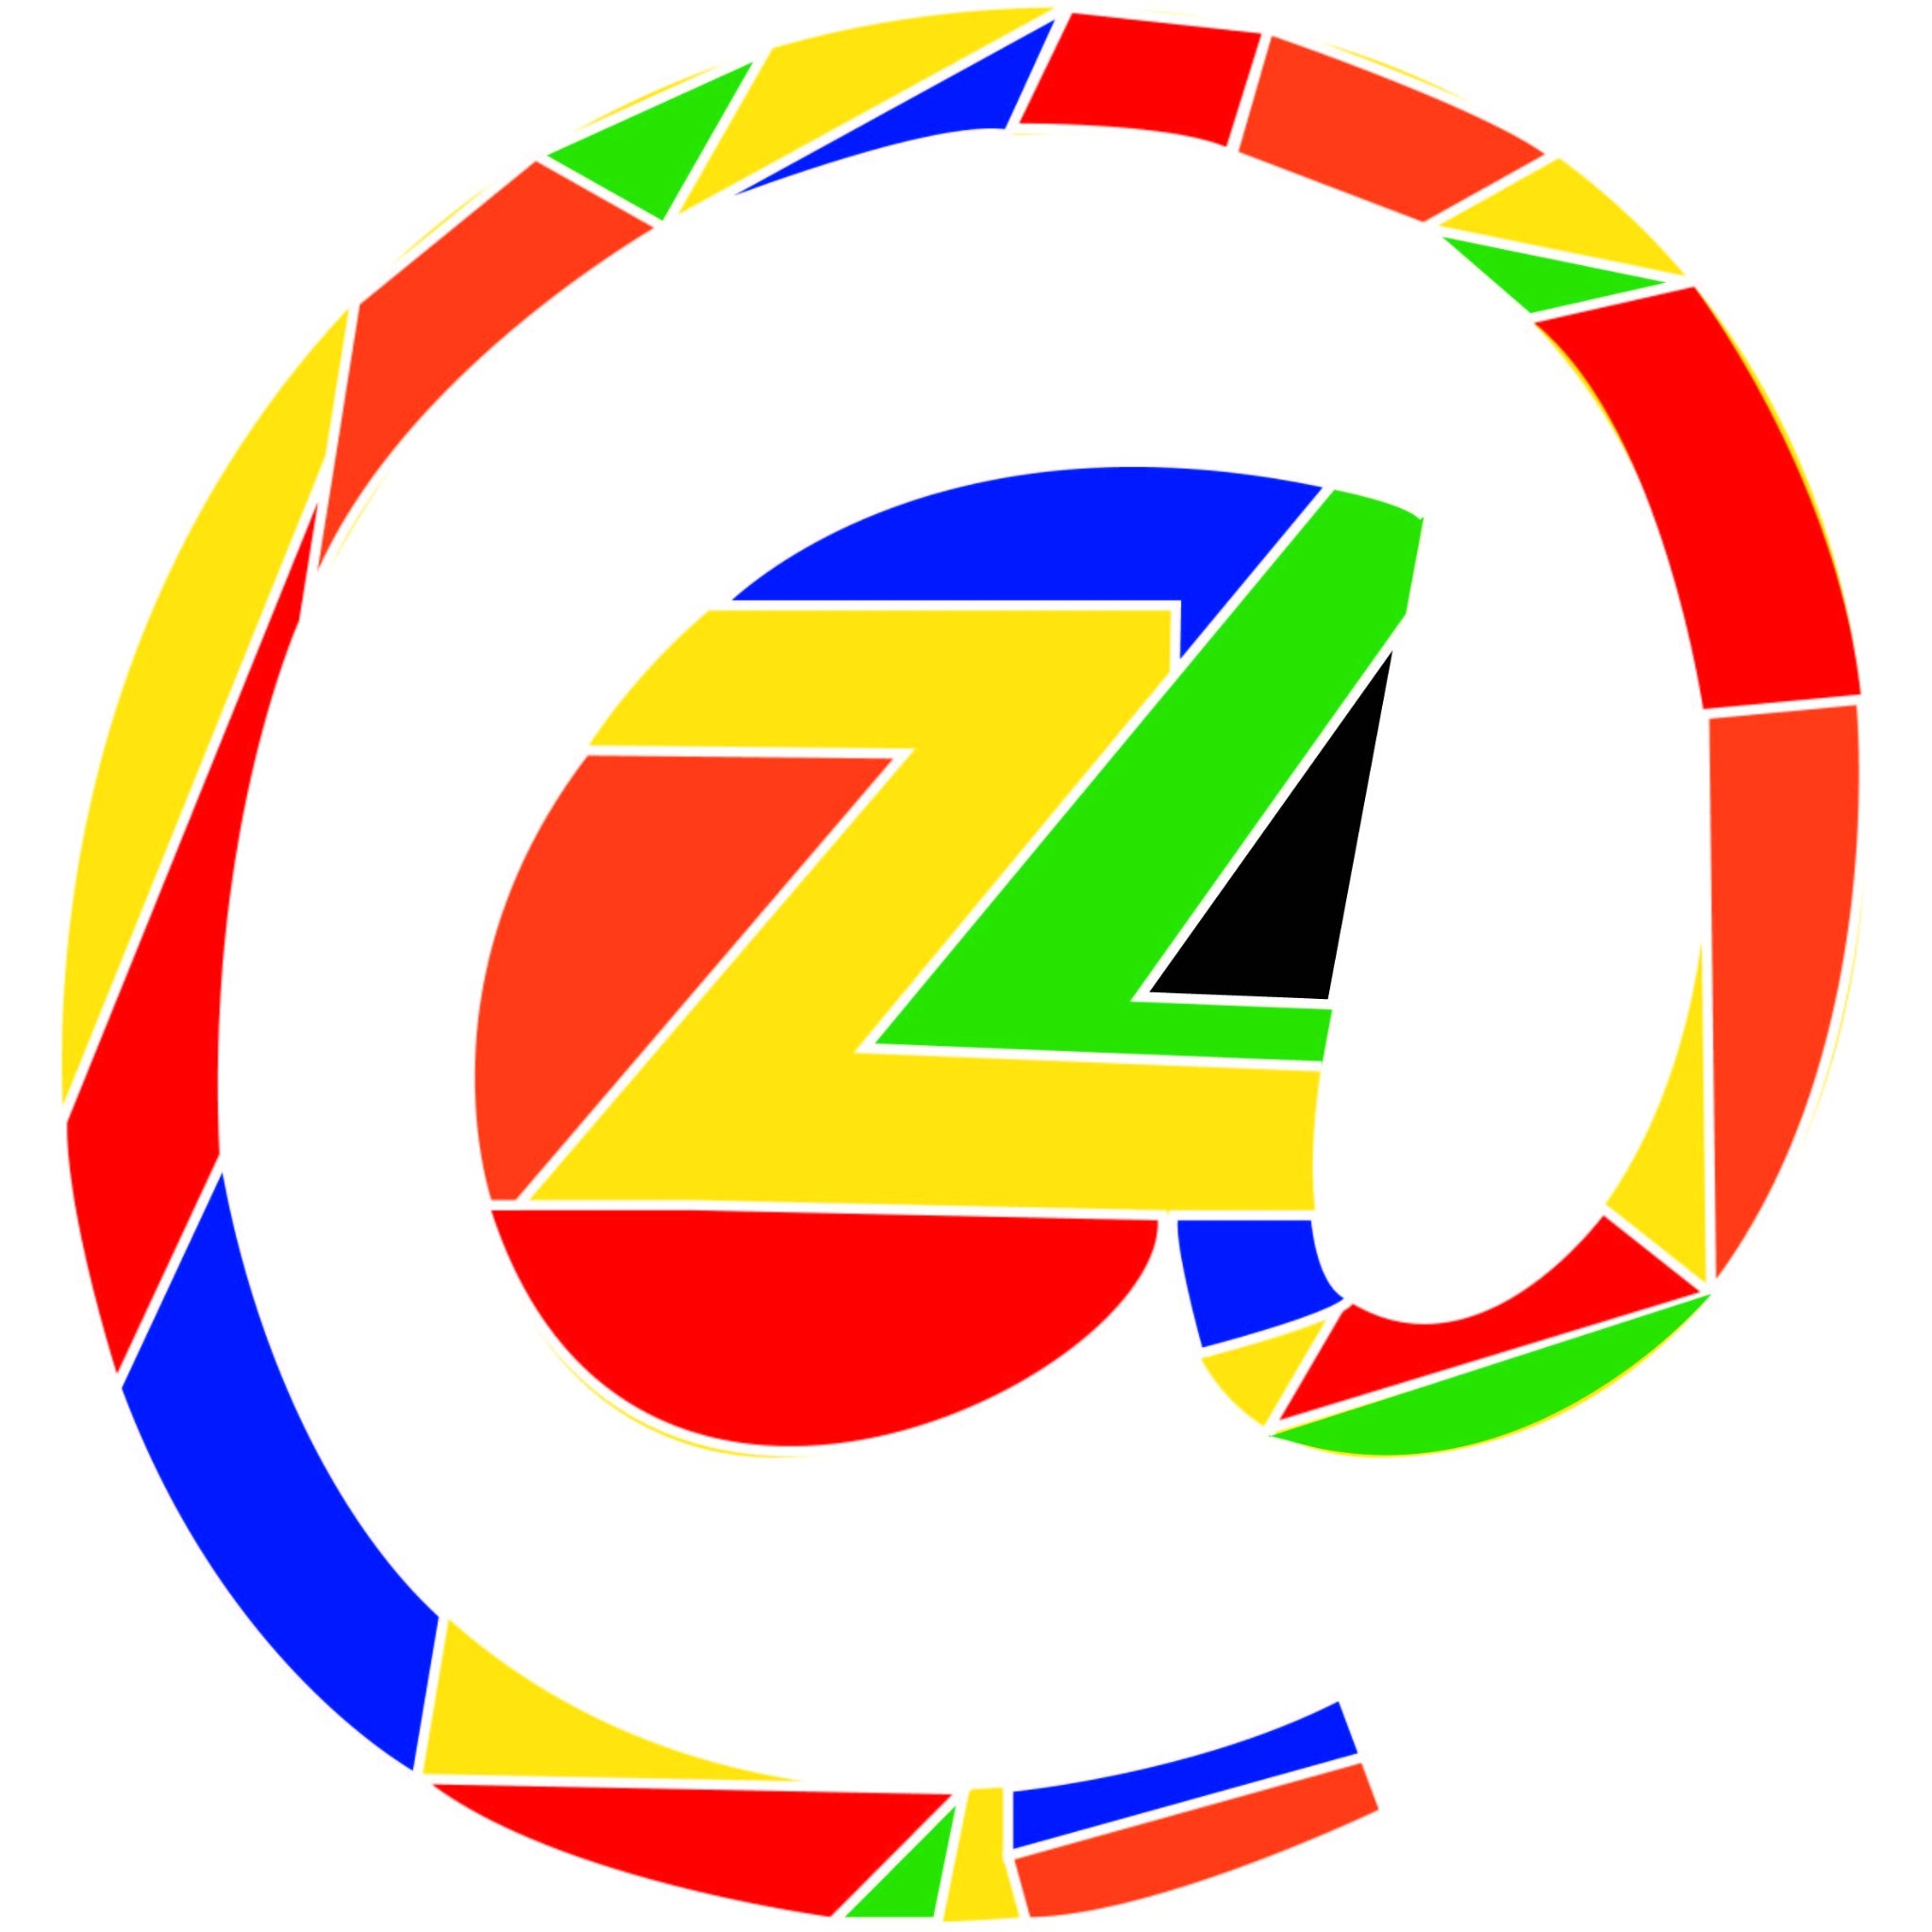 The ZAIGF is a multistakeholder platform, which facilitates dialogue on public policy issues inherent to Internet Governance in an open and transparent manner.